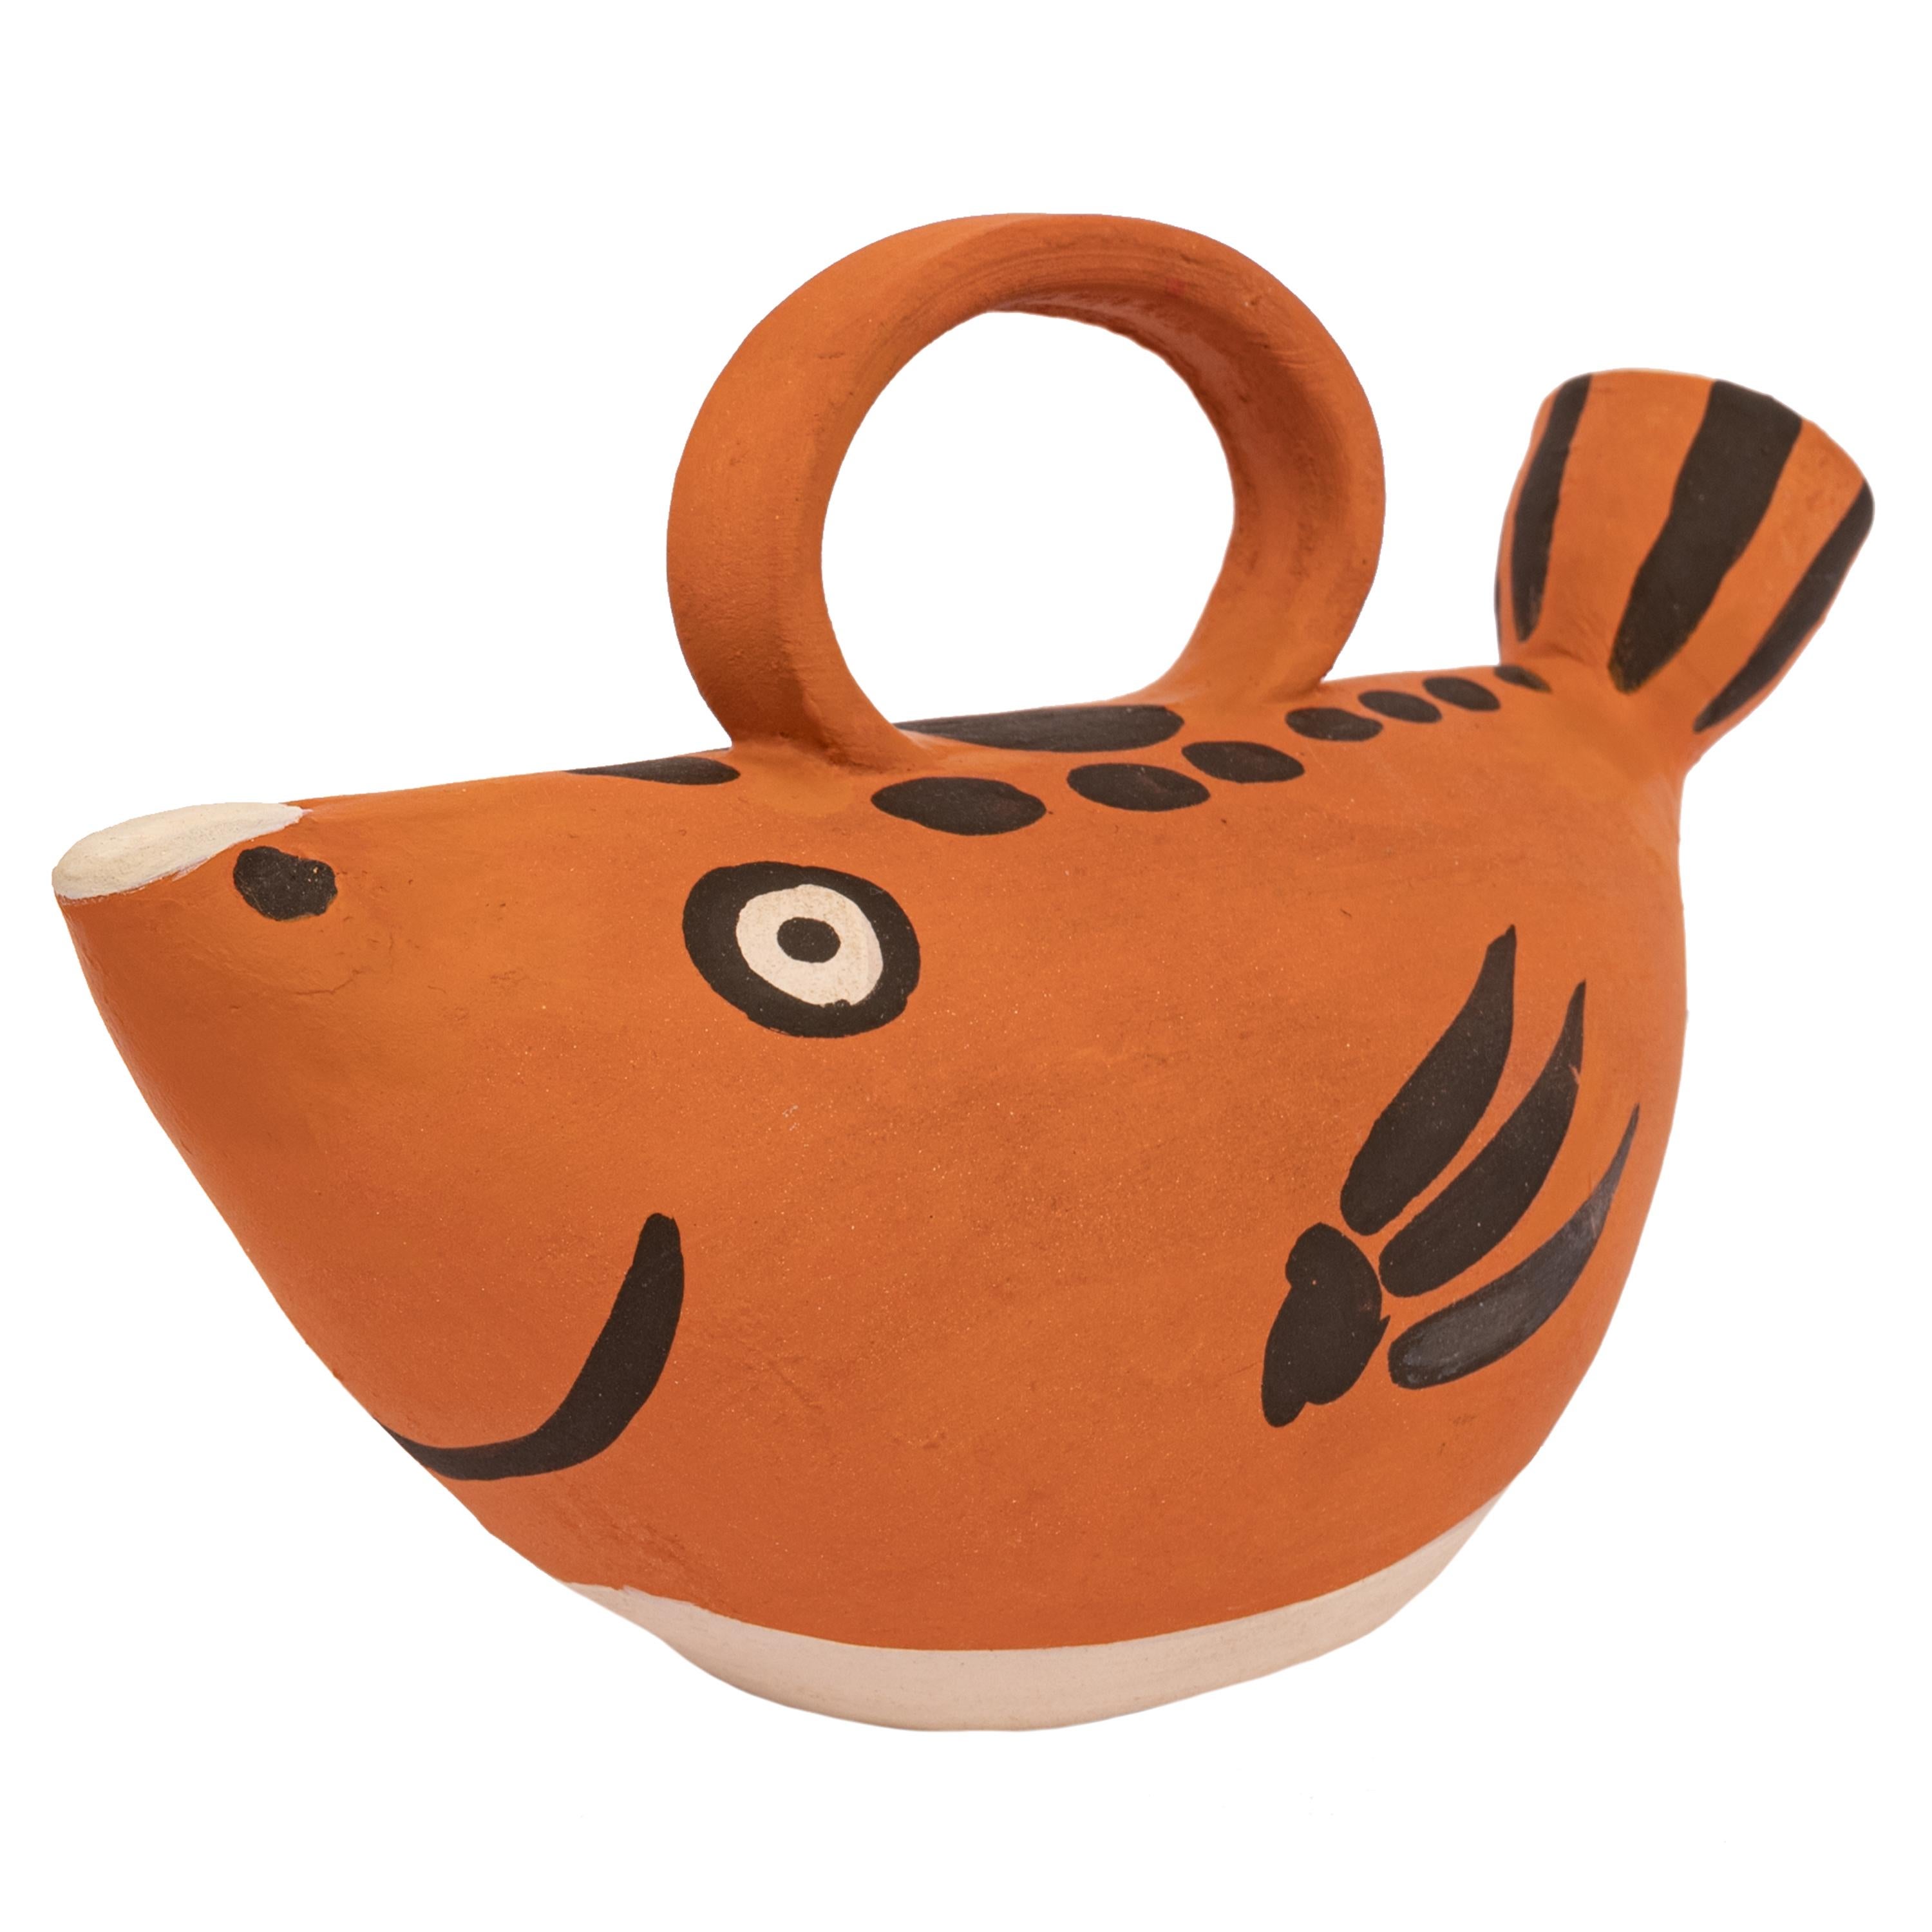 Pablo Picasso (1881-1973), terracotta fish pitcher. Madoura pottery 1952.
This original terracotta fish pitcher was created by Picasso in 1952 and was produced by Madoura Pottery workshop located in Southern France. There were two versions of this